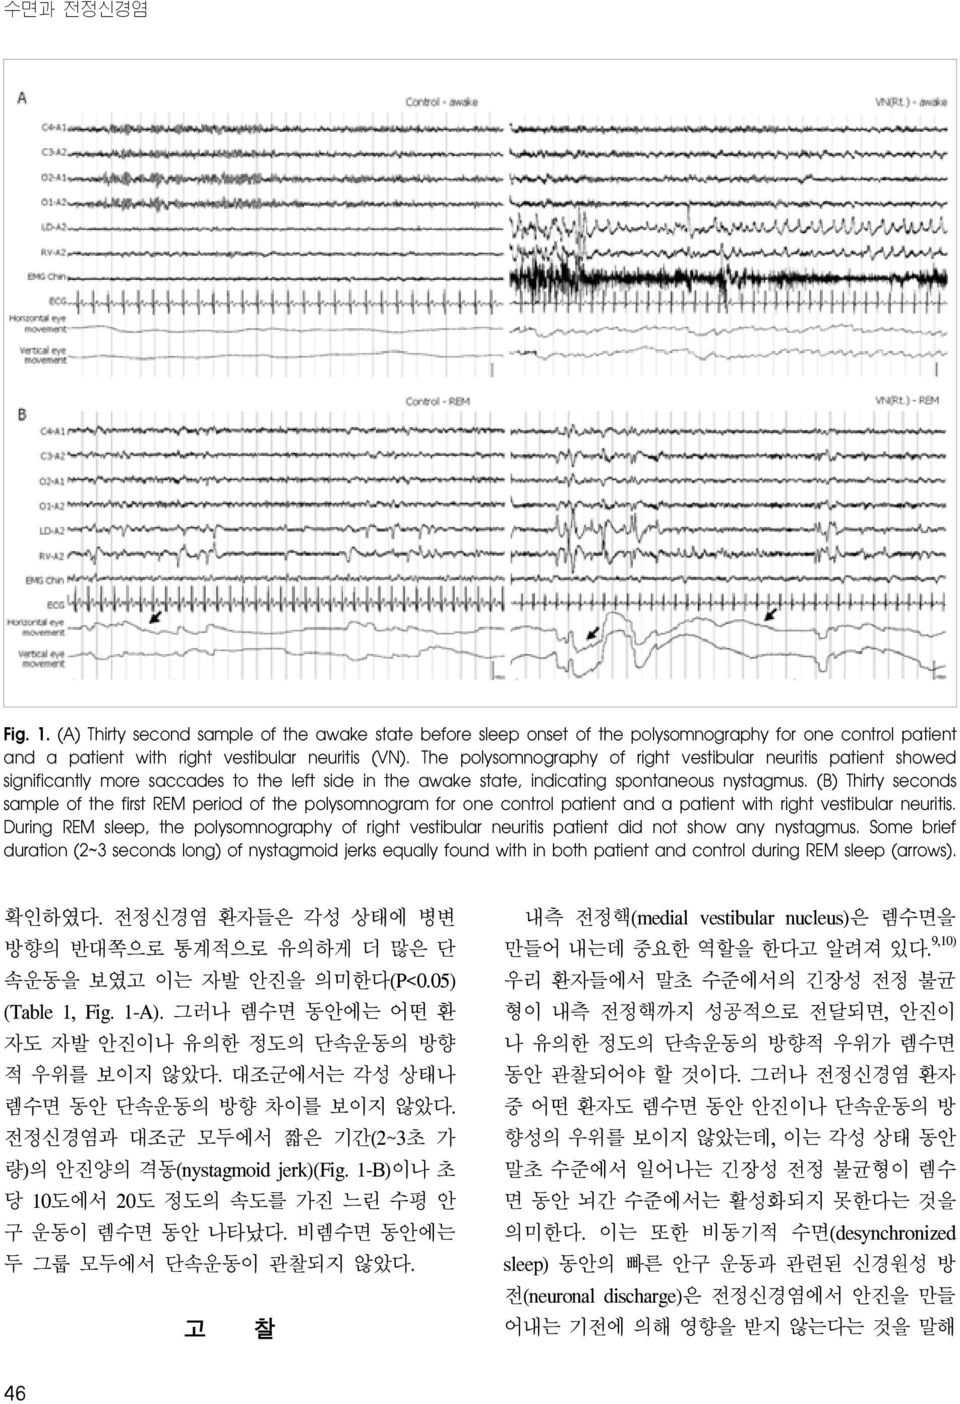 (B) Thirty seconds sample of the first REM period of the polysomnogram for one control patient and a patient with right vestibular neuritis.